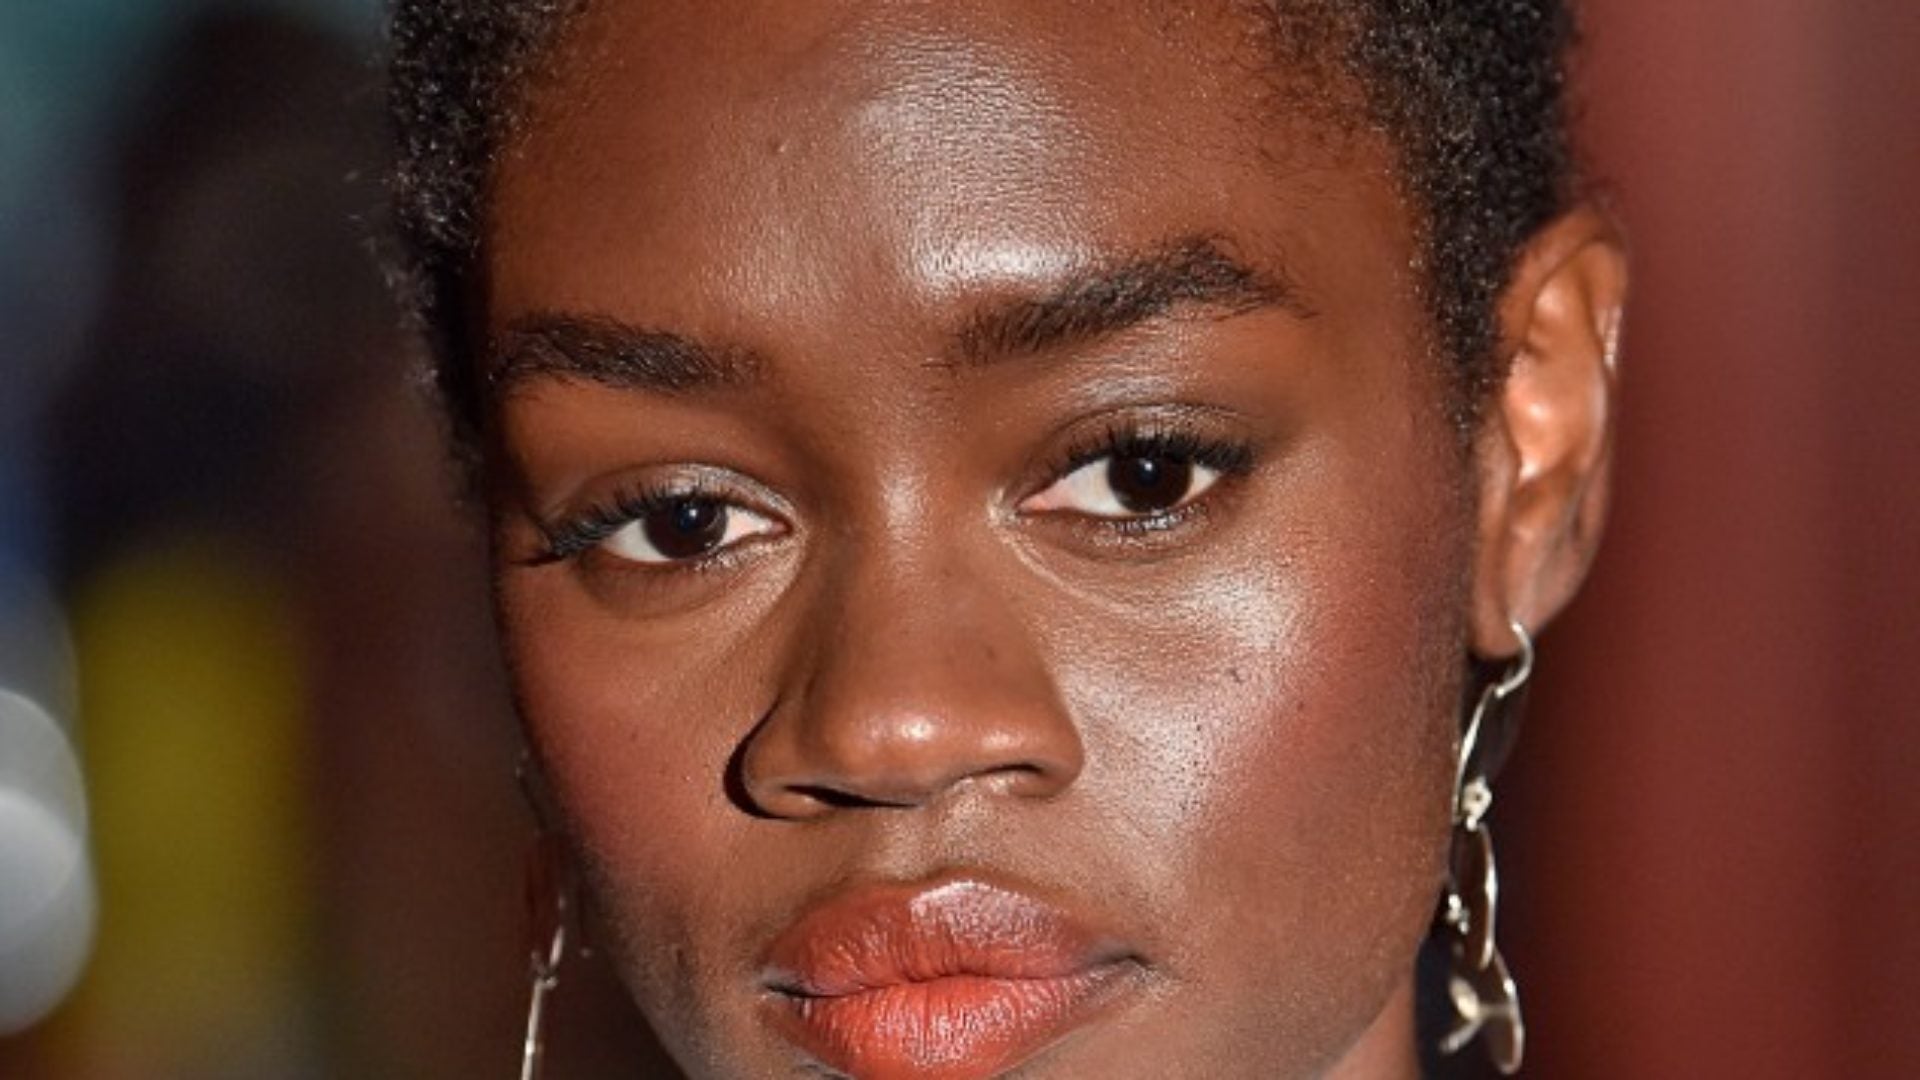 Why I’m Hoping The Bushy Brow Trend Is Not Fleeting